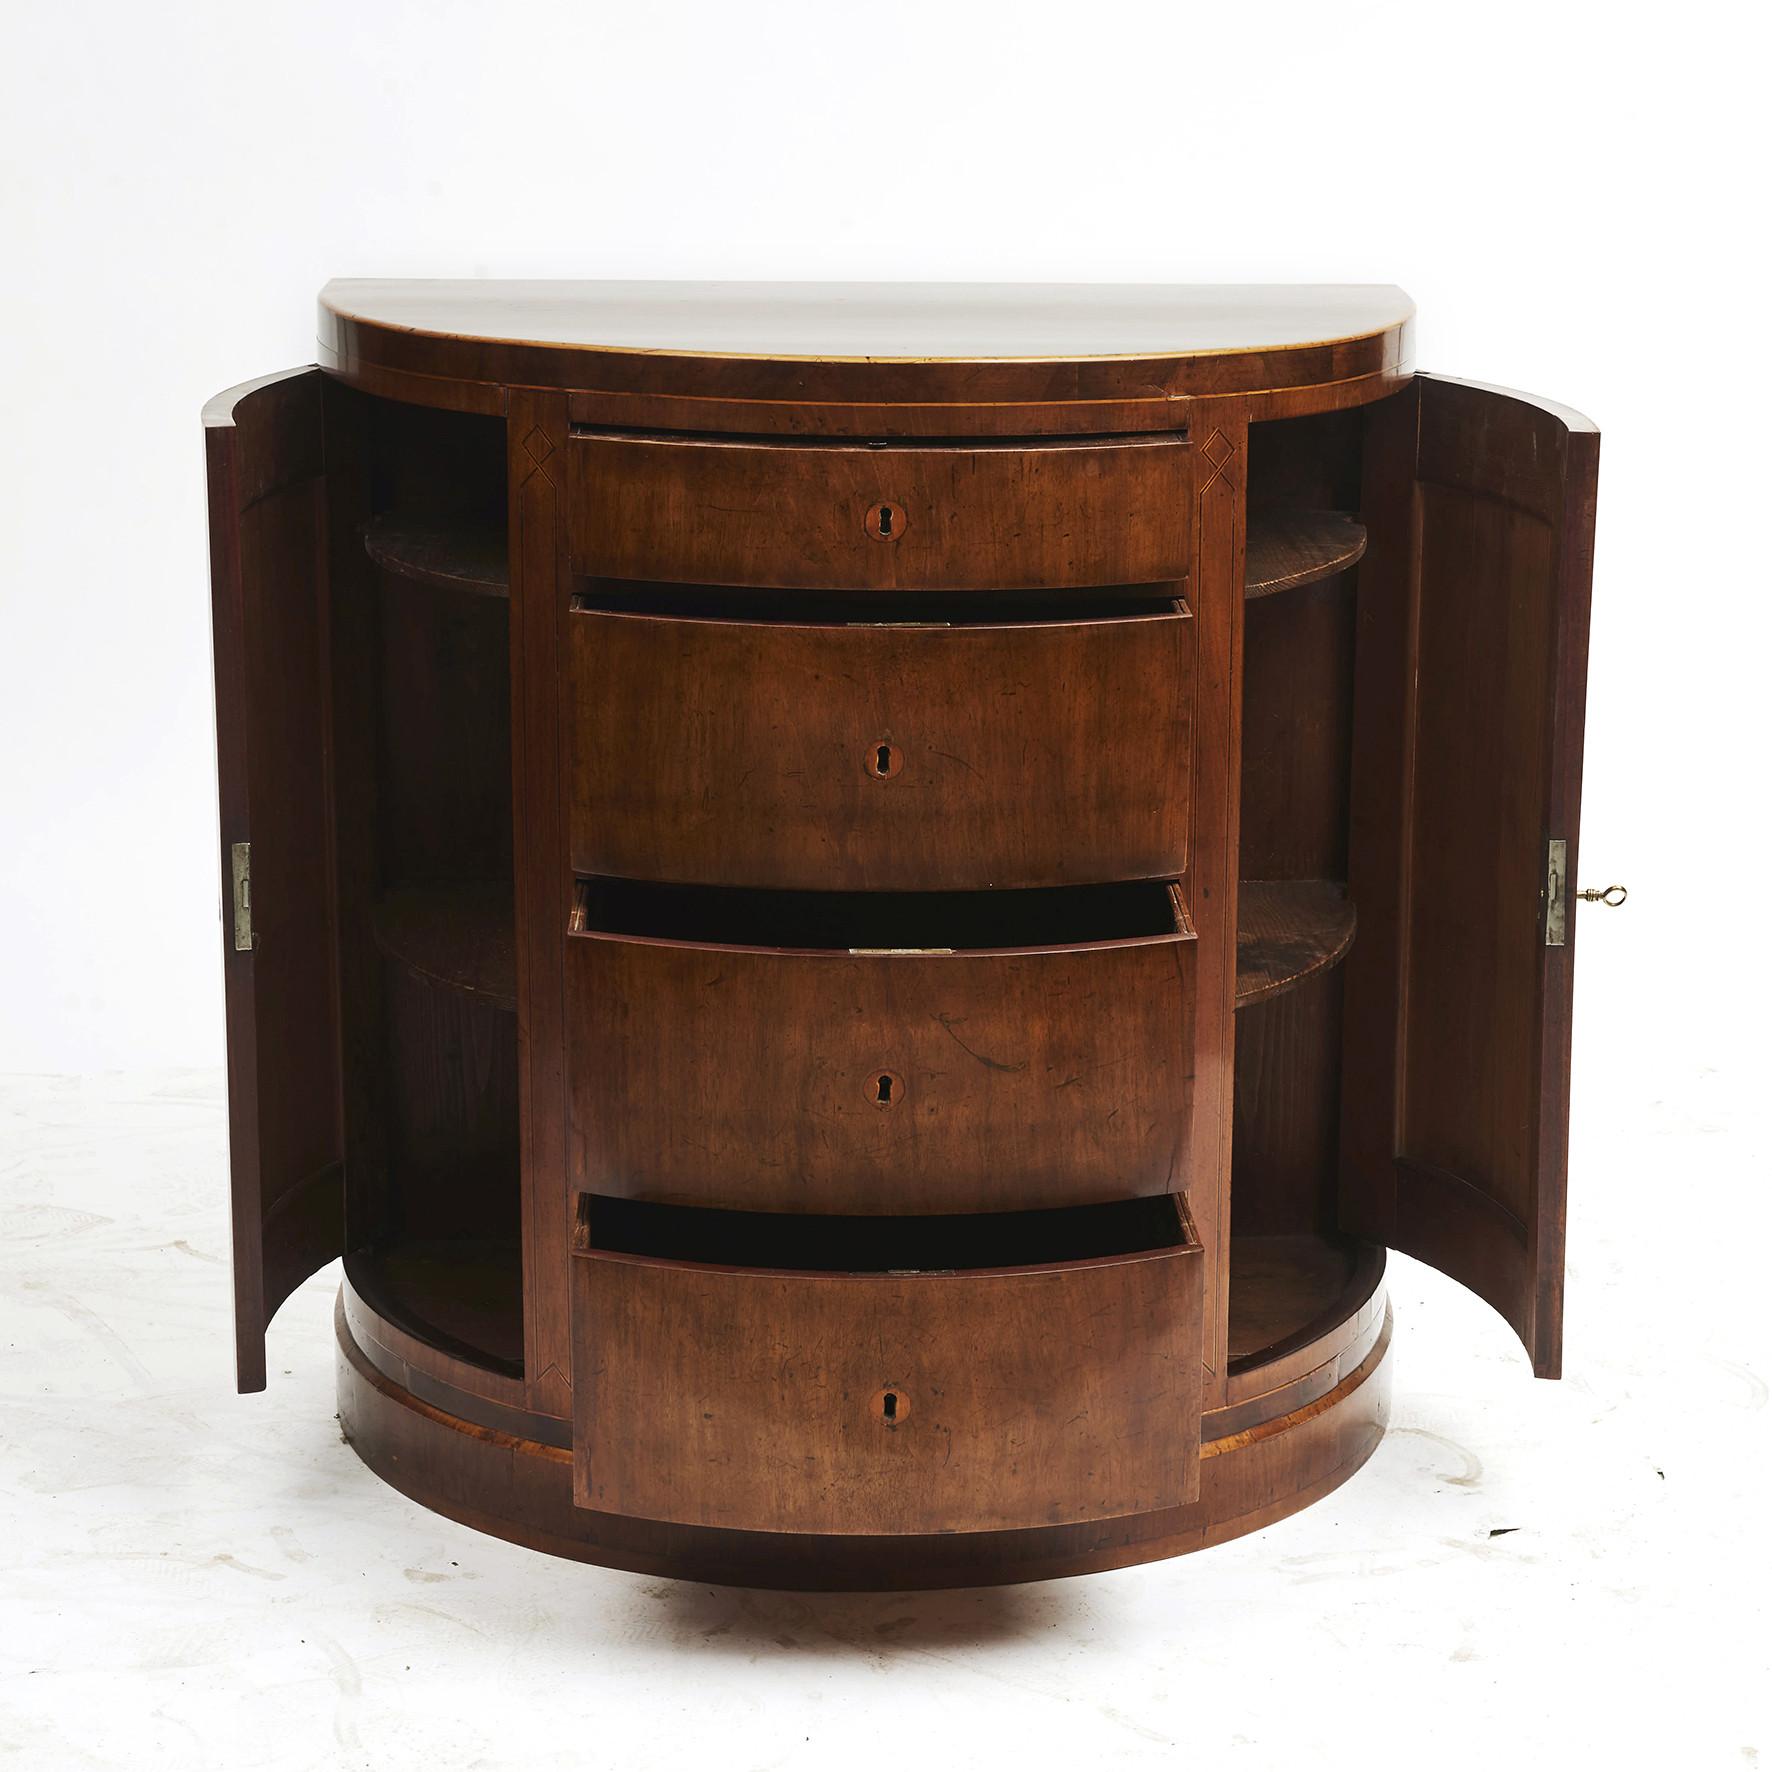 Danish empire demilune commode or cabinet in mahogany.
4 central drawers flanked by cupboard doors.
Top drawer with pull-out writing surface.
Half round top with inlays in satinwood. Doors with marquetry in dark and light wood.
Copenhagen,